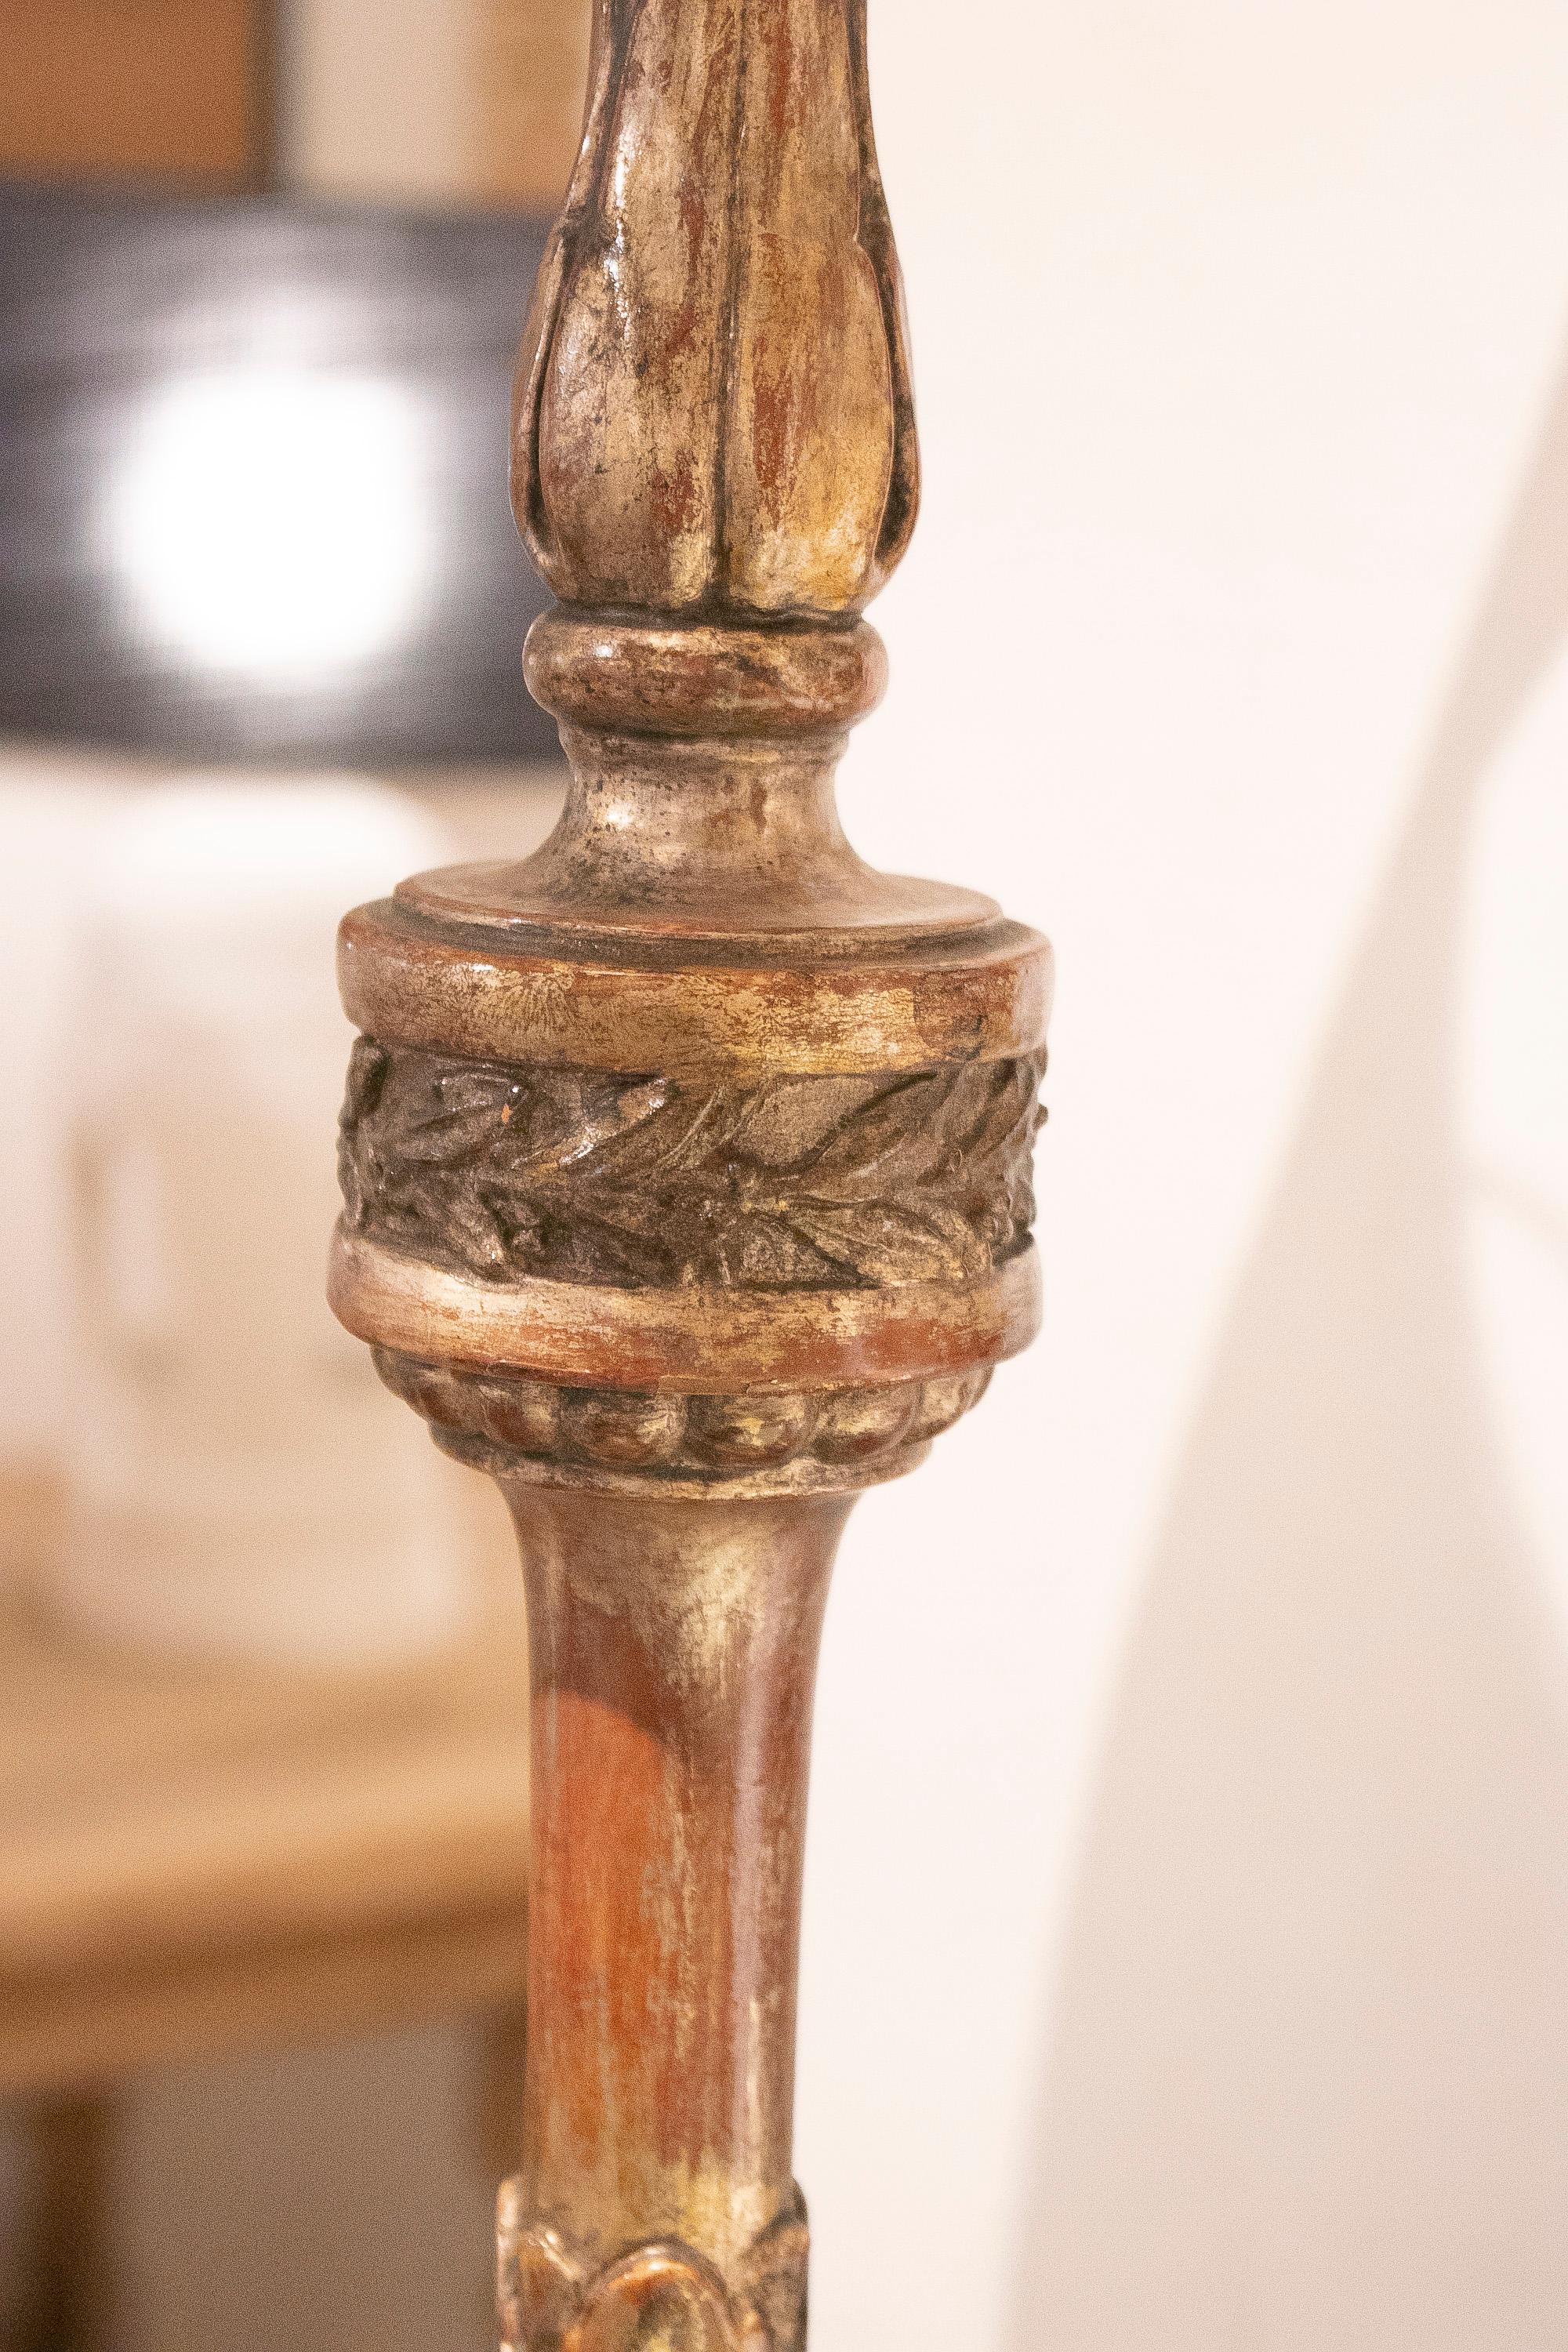 19th Century Spanish Giltwood Candlestick Turned Table Lamp For Sale 2